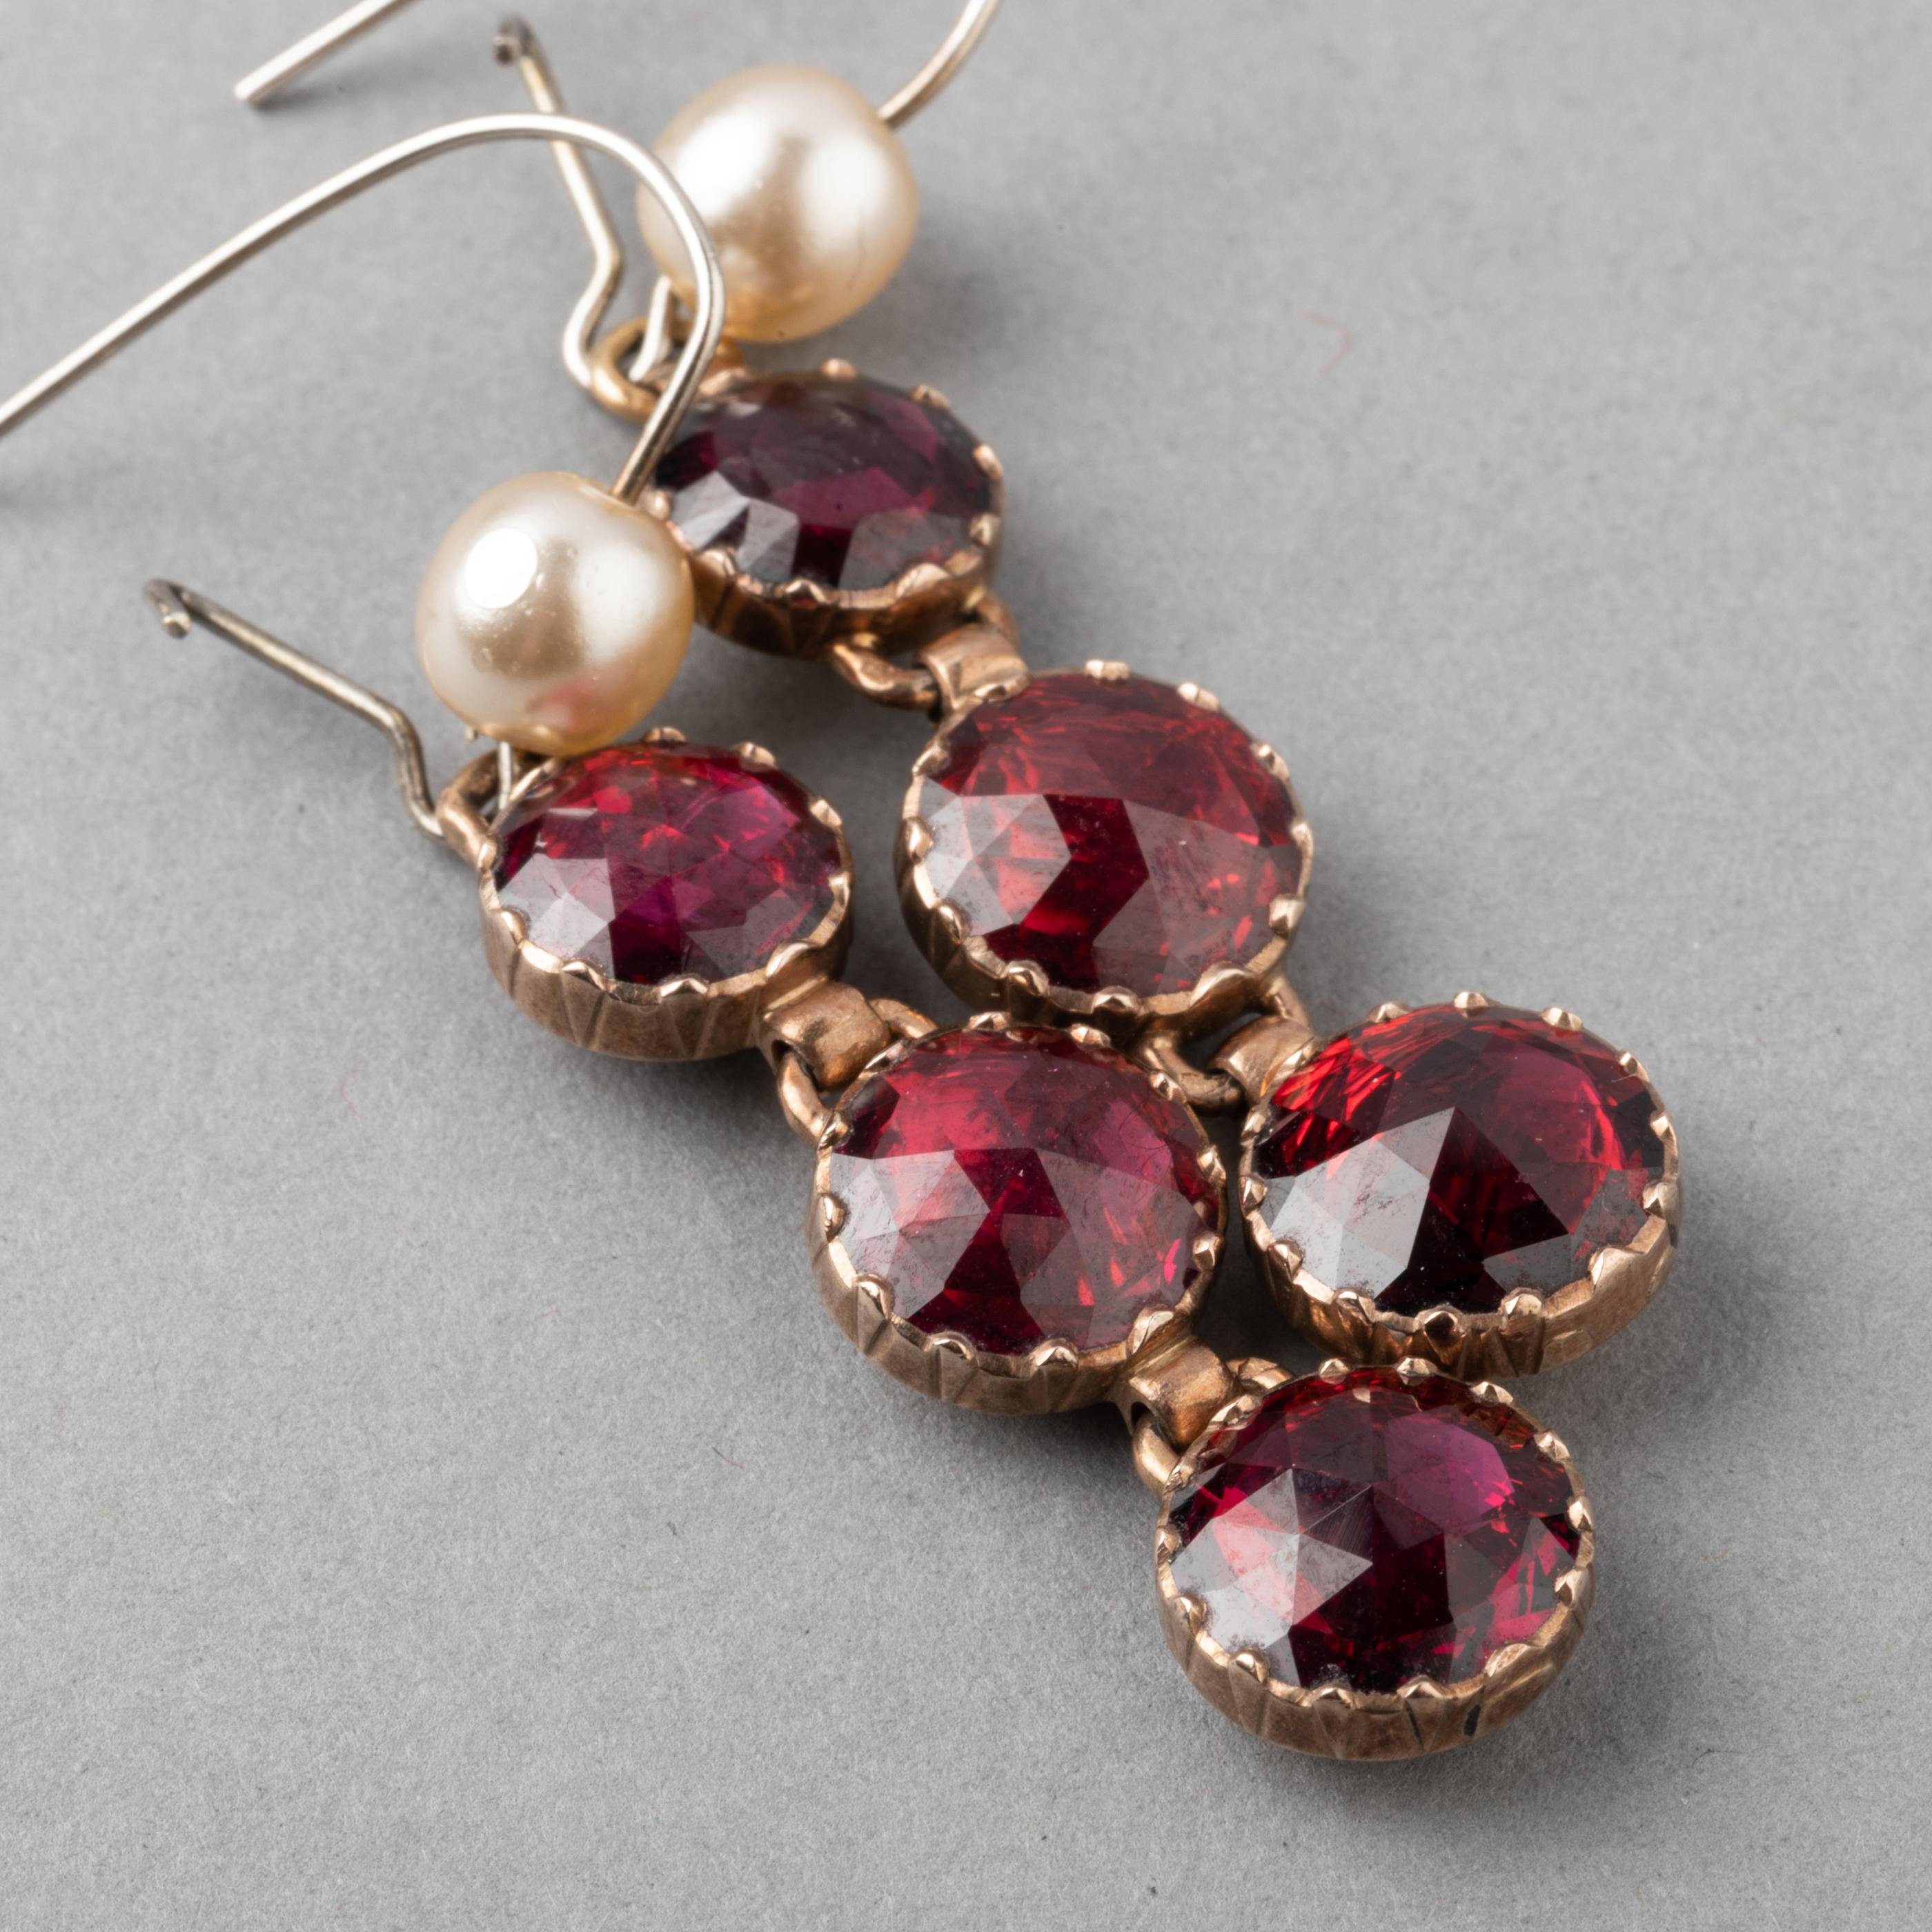 Belle Époque Antique Gold and Garnets French Earrings